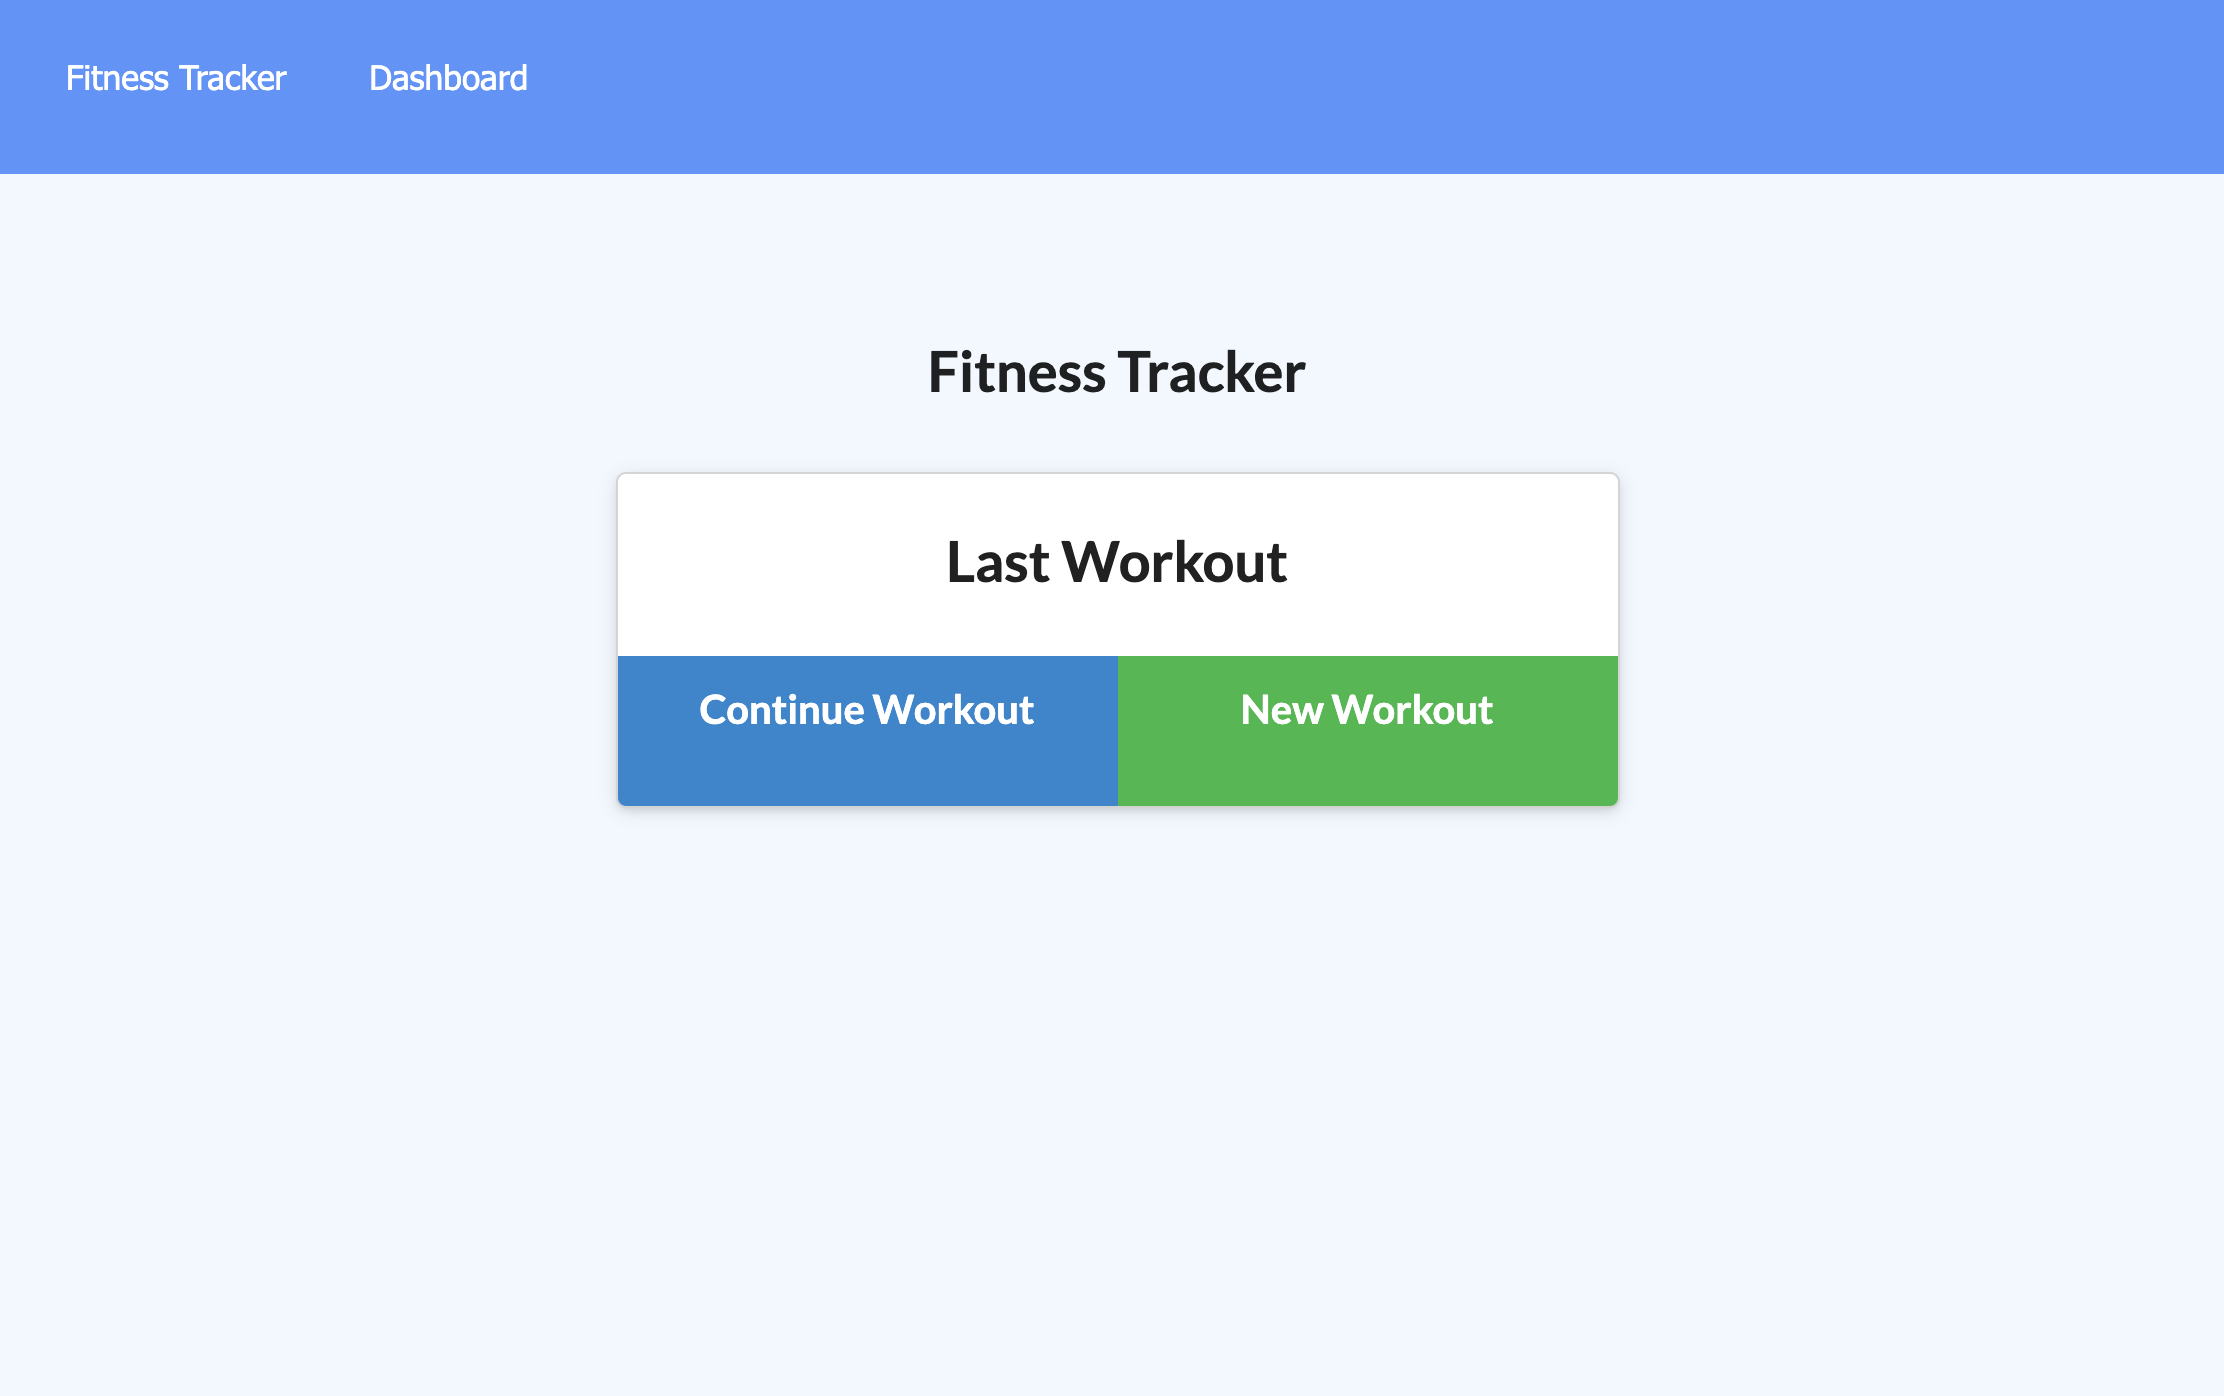 Finished Fitness Tracker.